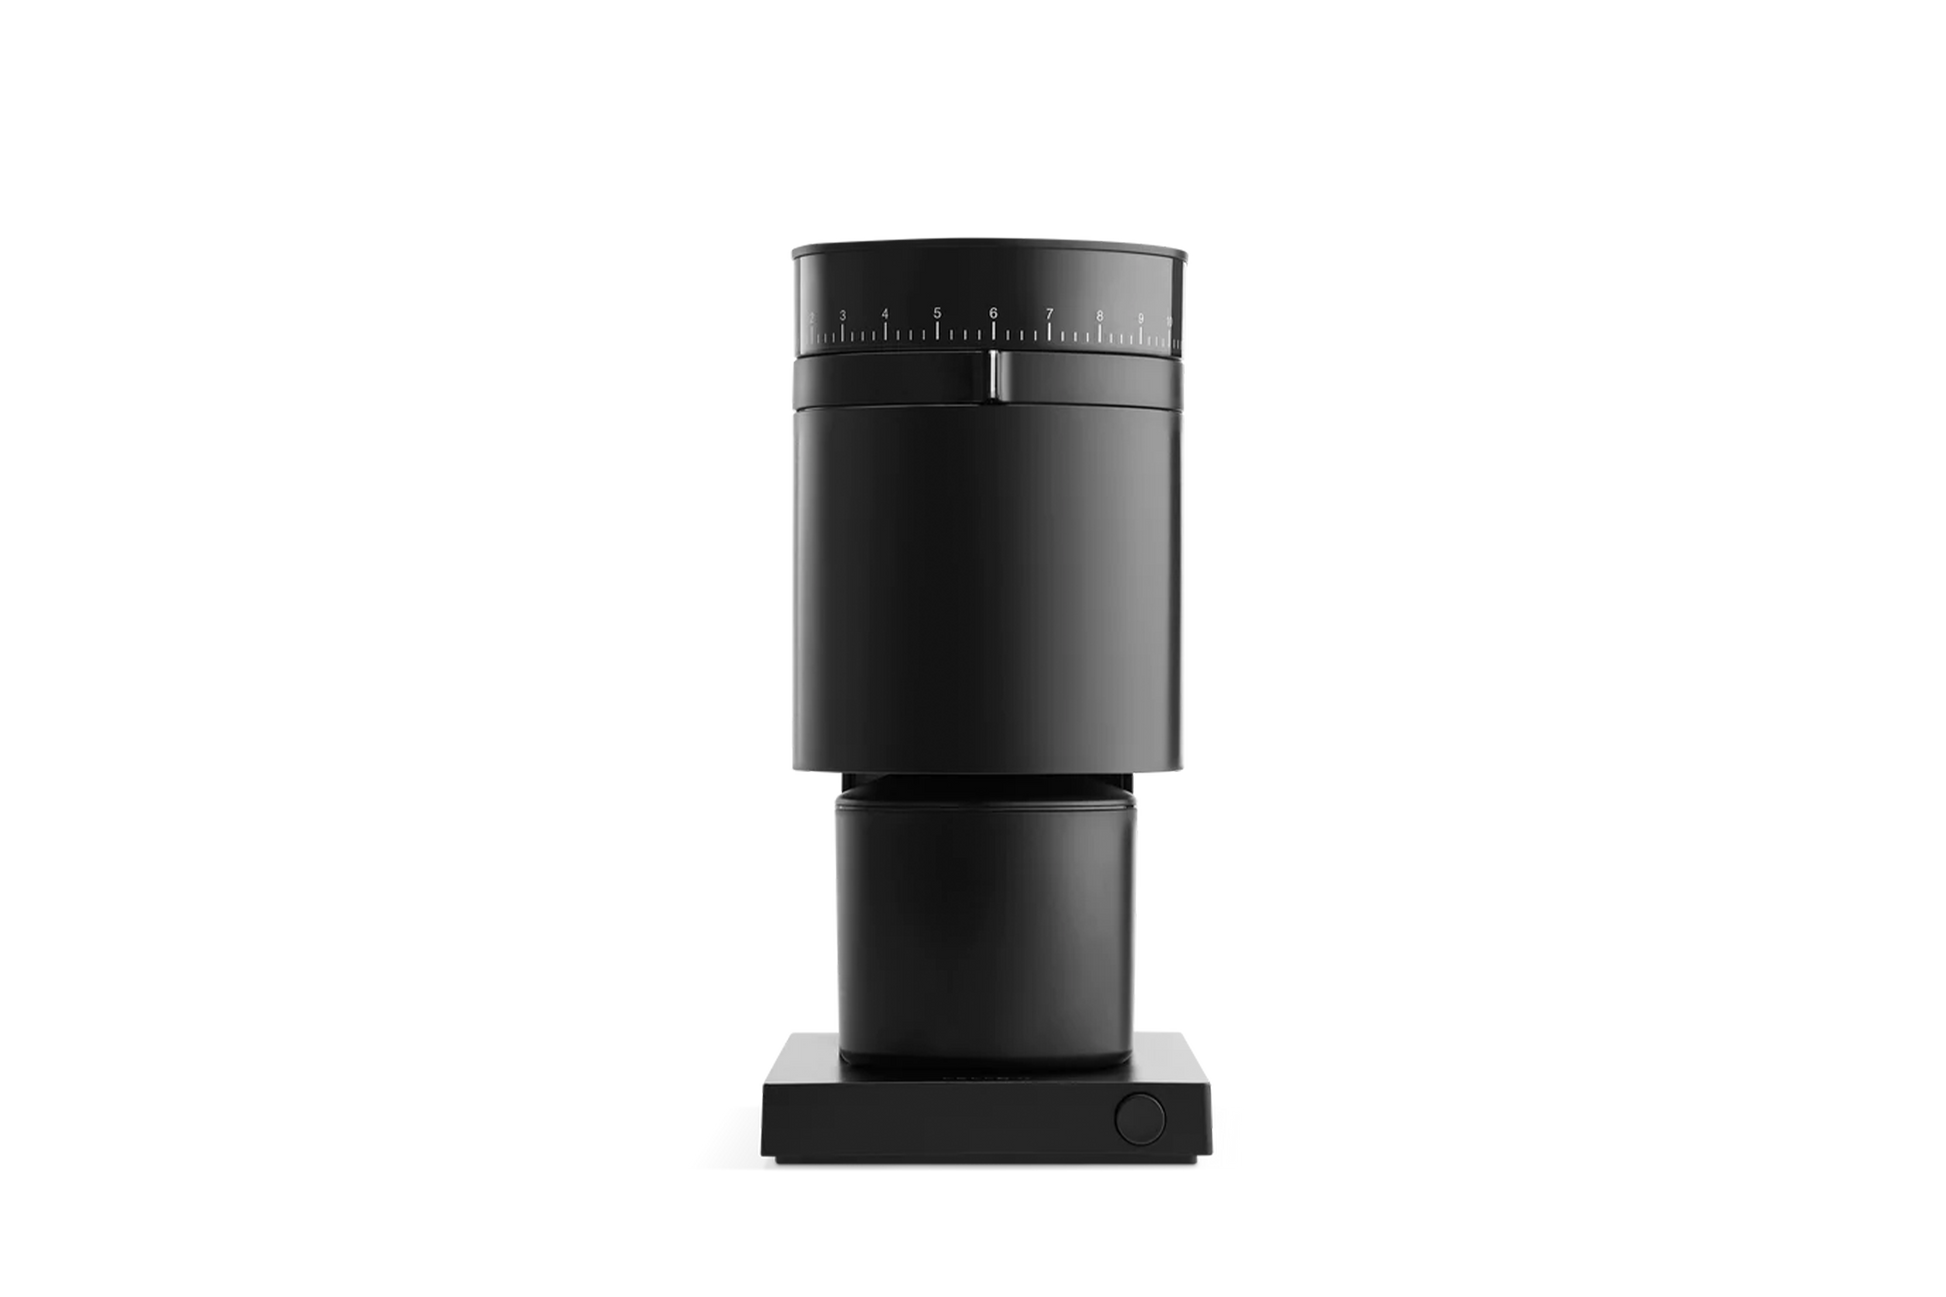 An all purpose conical burr coffee grinder, the Fellow Opus is capable of grinding for all coffee brewing methods, from espresso to filter.